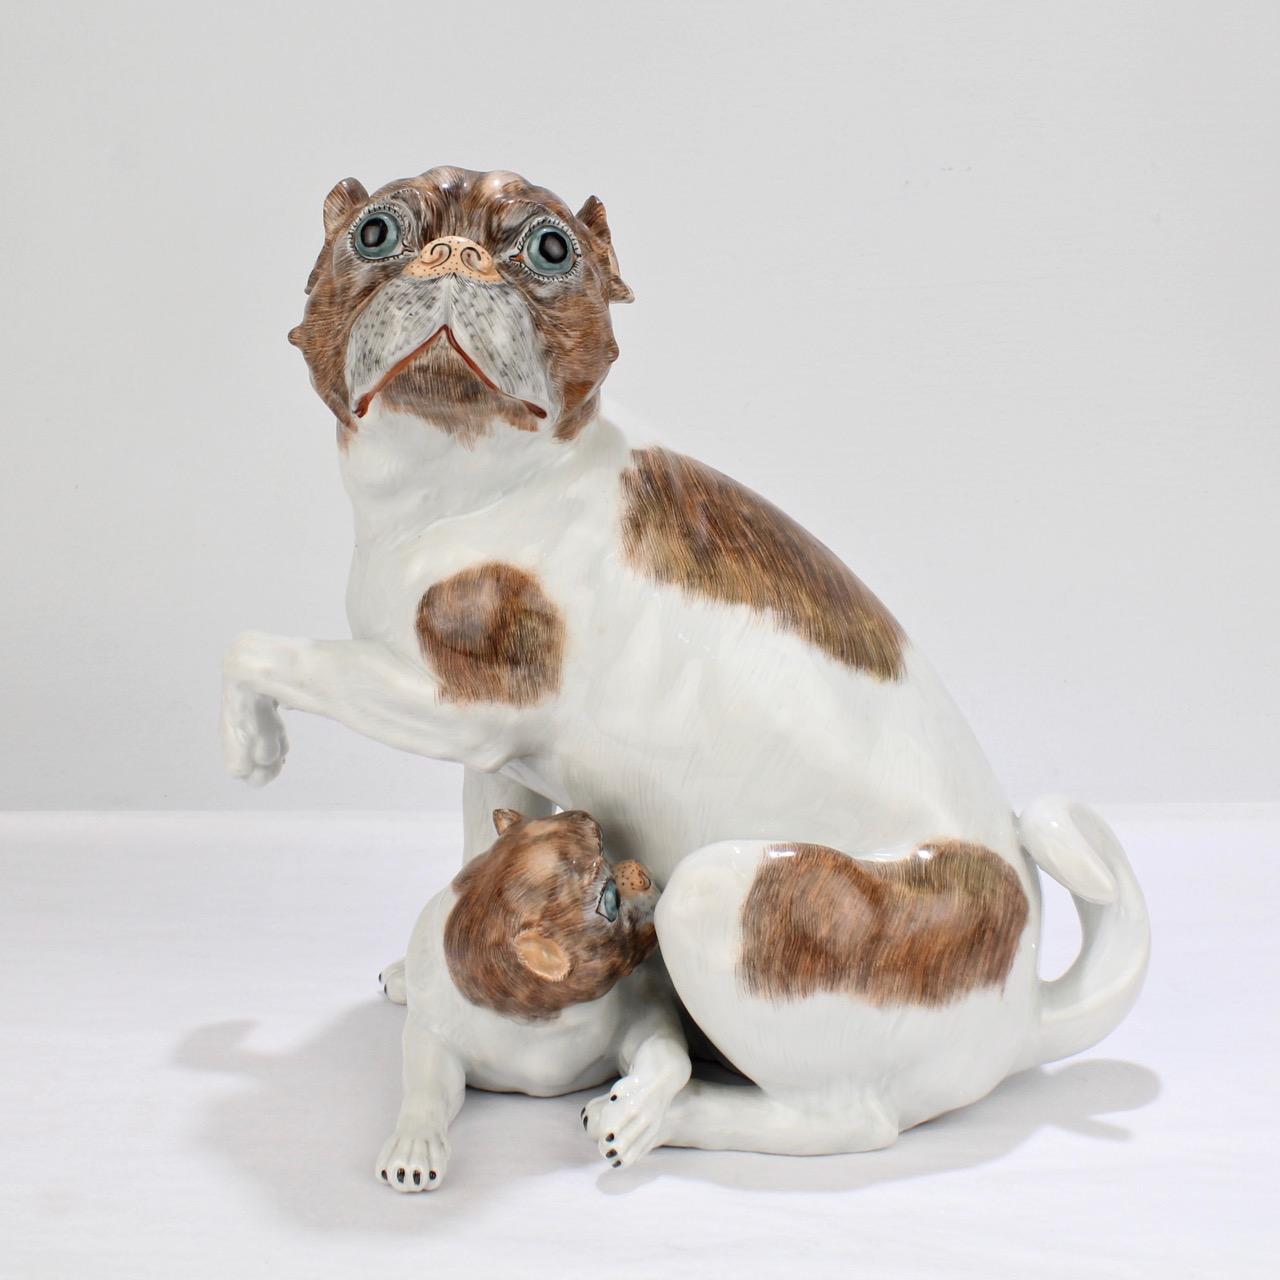 A wonderful Dresden porcelain figurine of a mother pug and her puppy.

The figurine is modeled after the 18th century Meissen figurine by Johannes Kaendler with the puppy nestled snugly under the mother's belly. 

Each dog is decorated in brown